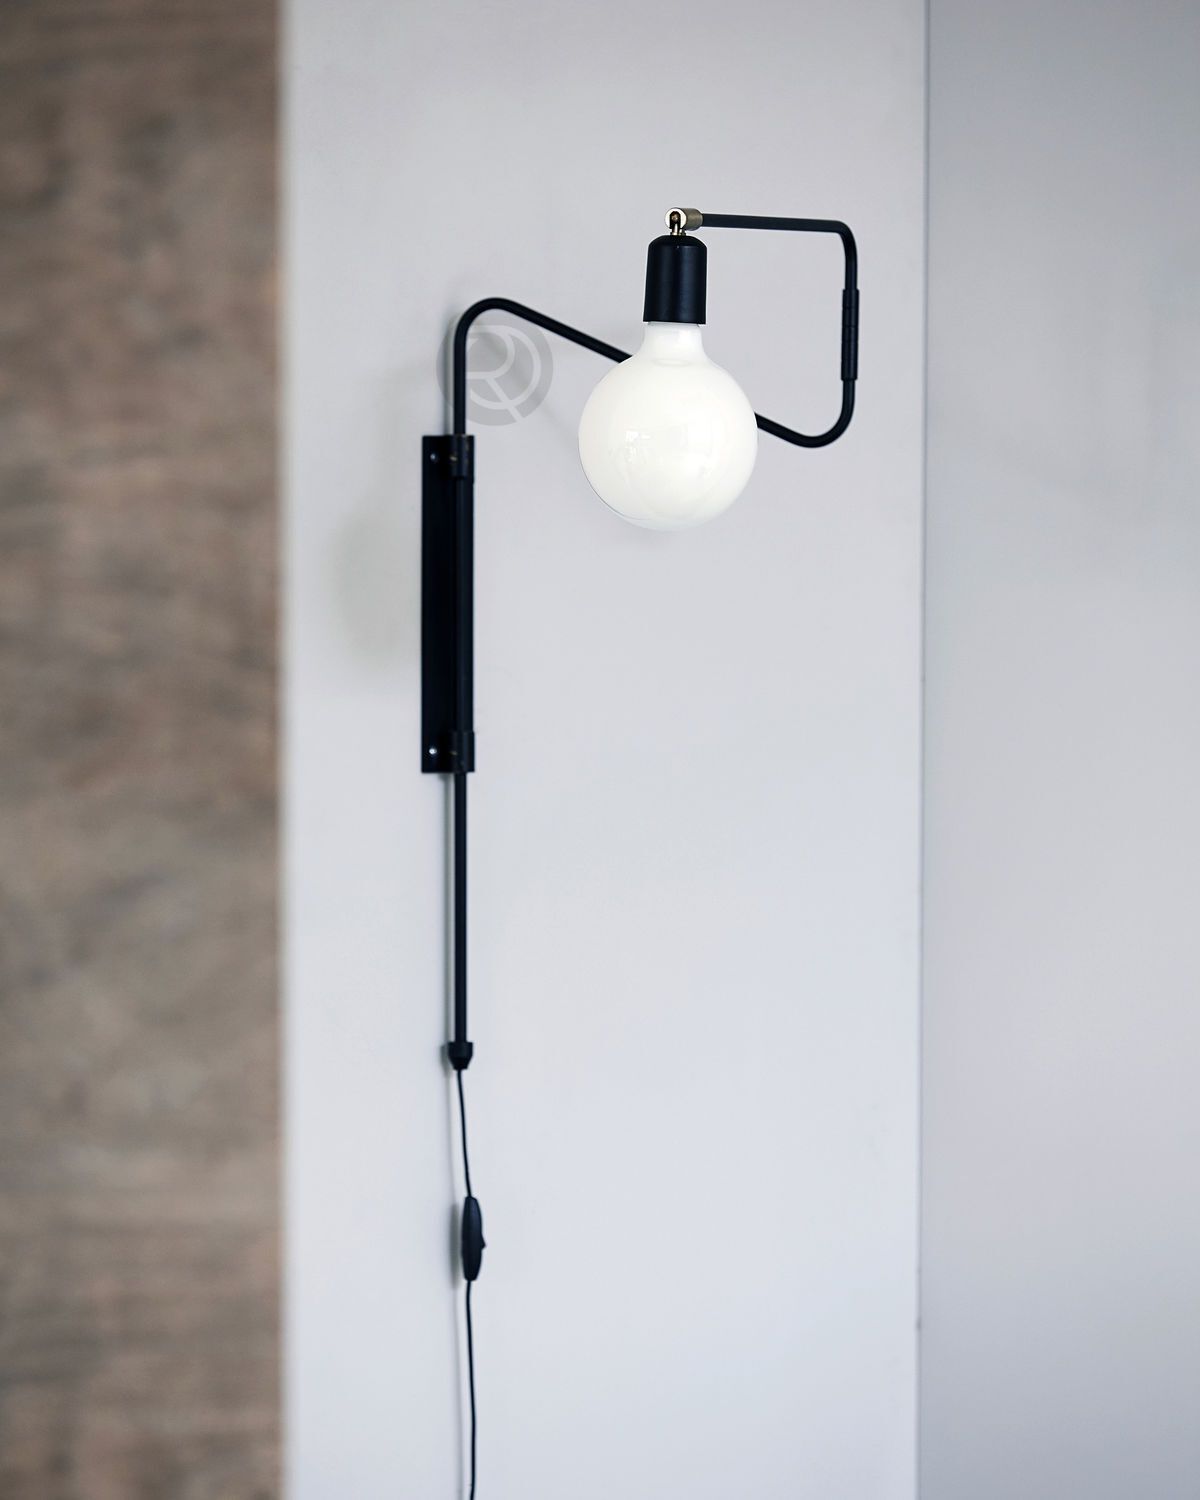 SWING MINI Wall Lamp by House Doctor